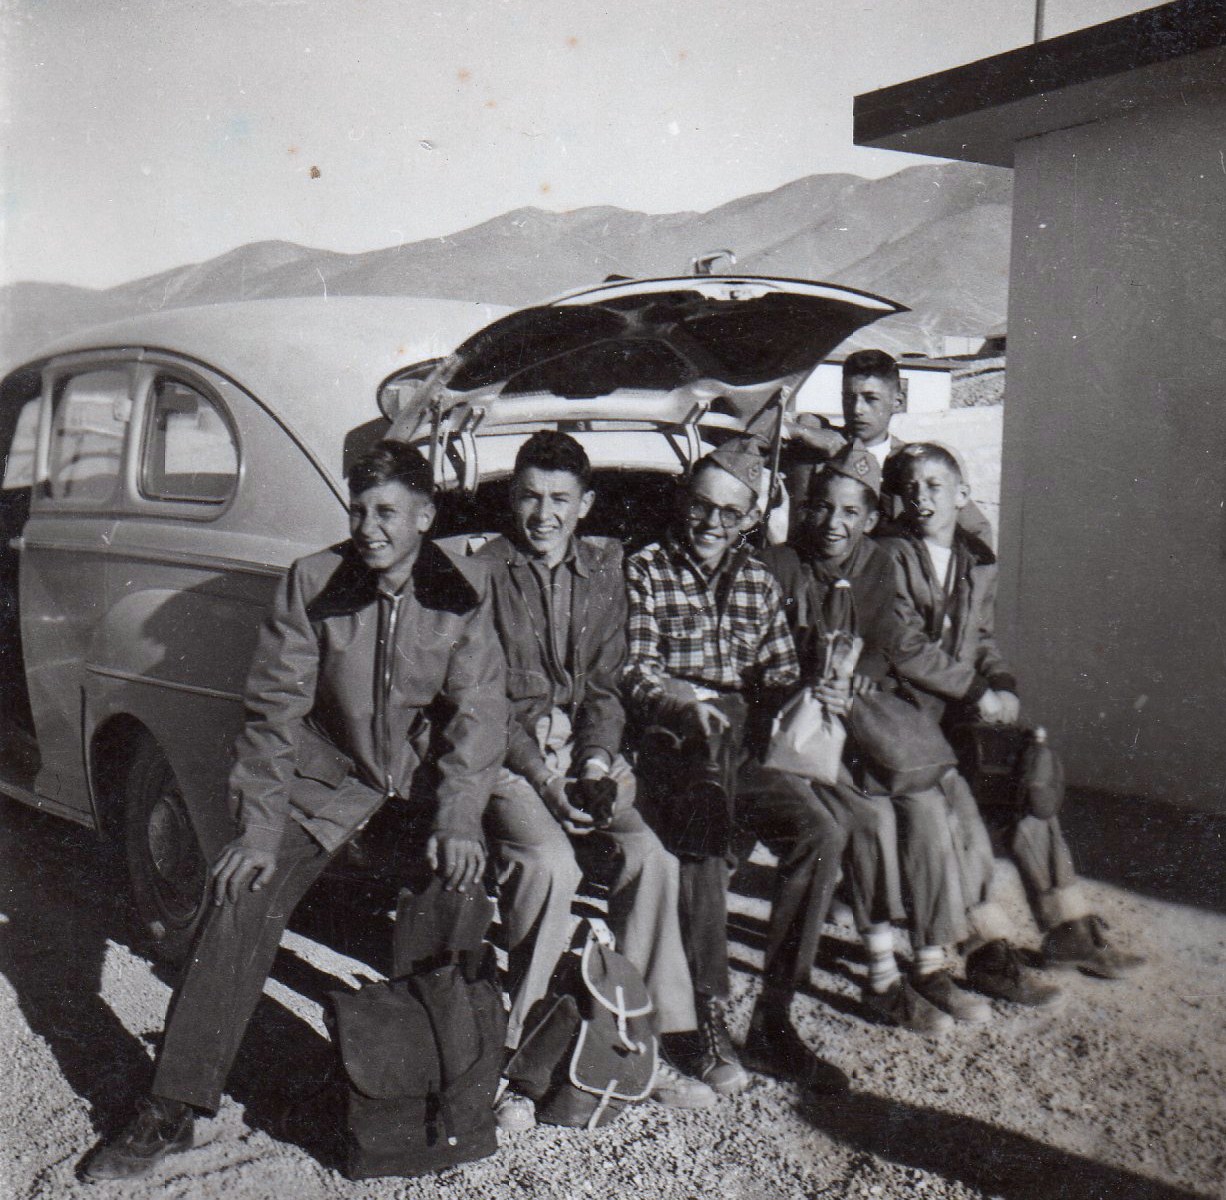 {}{ The First Boy Scout Troop from Chuquicamata};{@Date: 1954 or 1955};{@Place: Chuquicamata};{ Chile};{@Author:Charles and Clarence Fisk Godoy Modified: May 18};{2021};{*NOP*};{Alex Kochergin};{Arturo Leon};{Cristian Raventos Godoy};{Gaston Pasut};{George Raventos Godoy};{Glen Wyman};{Leonard Bolich};{eTg};{[ATHR]Charles and Clarence Fisk Godoy  Modified: May 18,2021